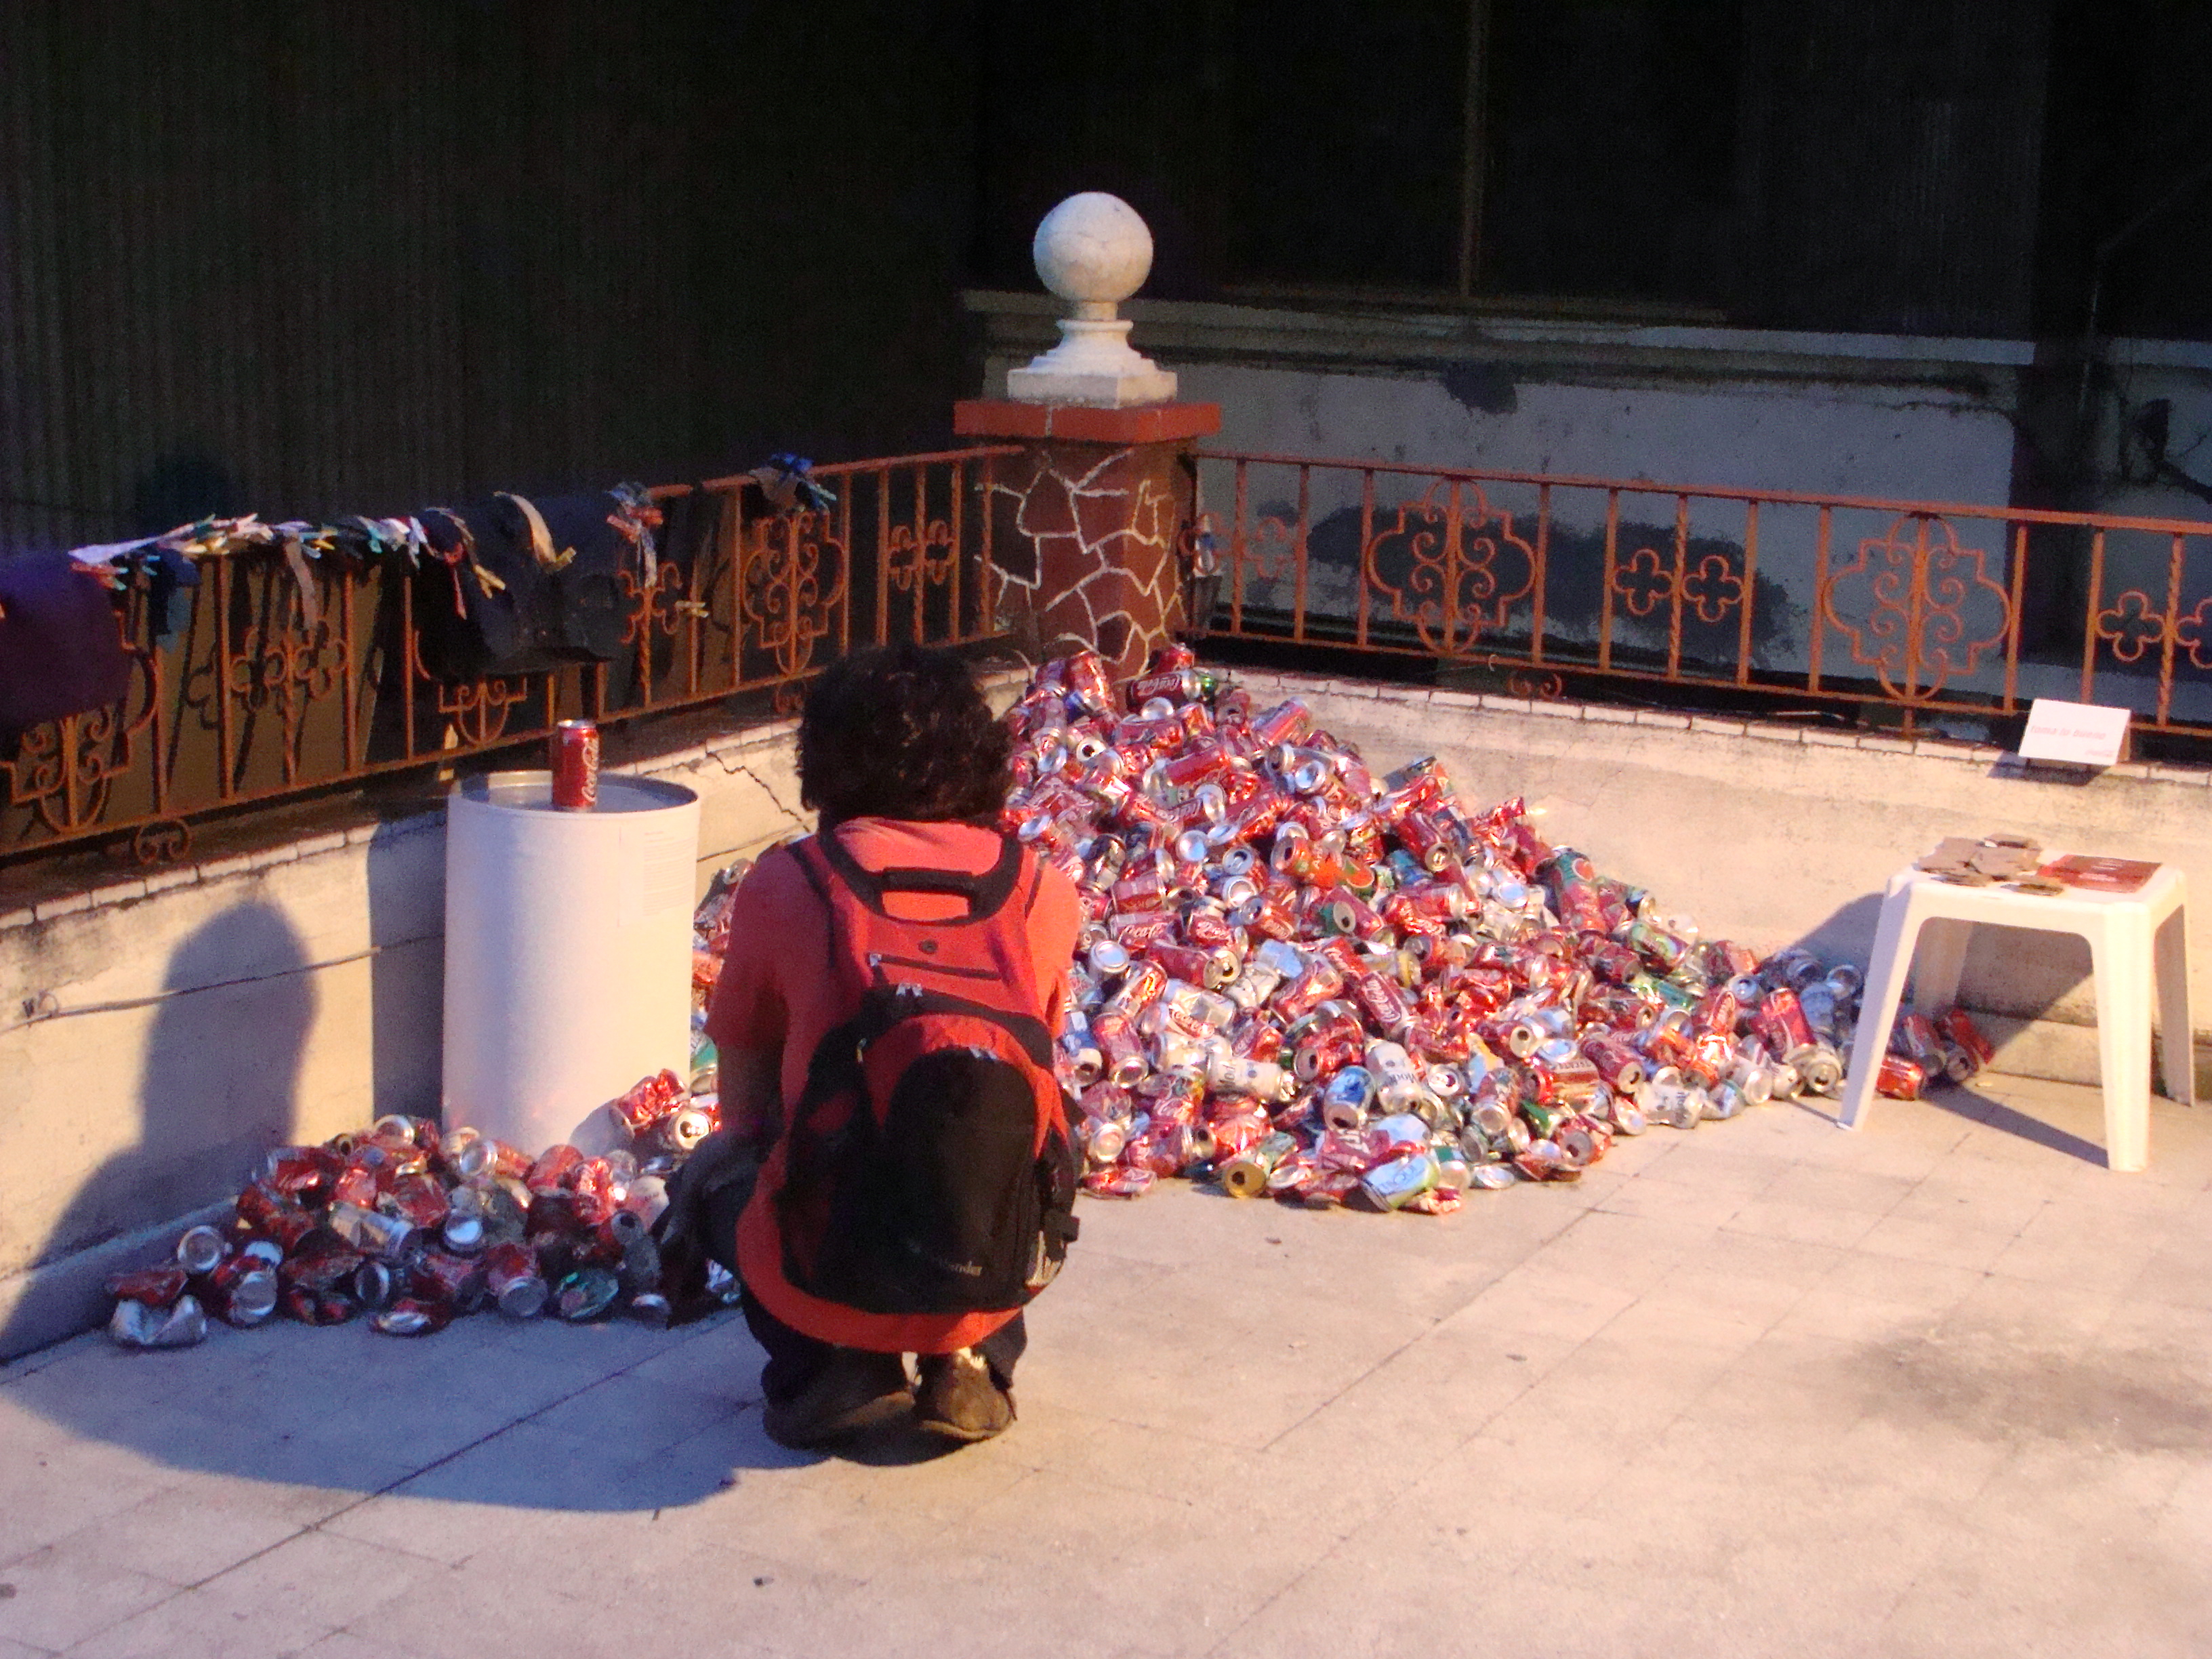 Installation with 30kg of aluminum cans